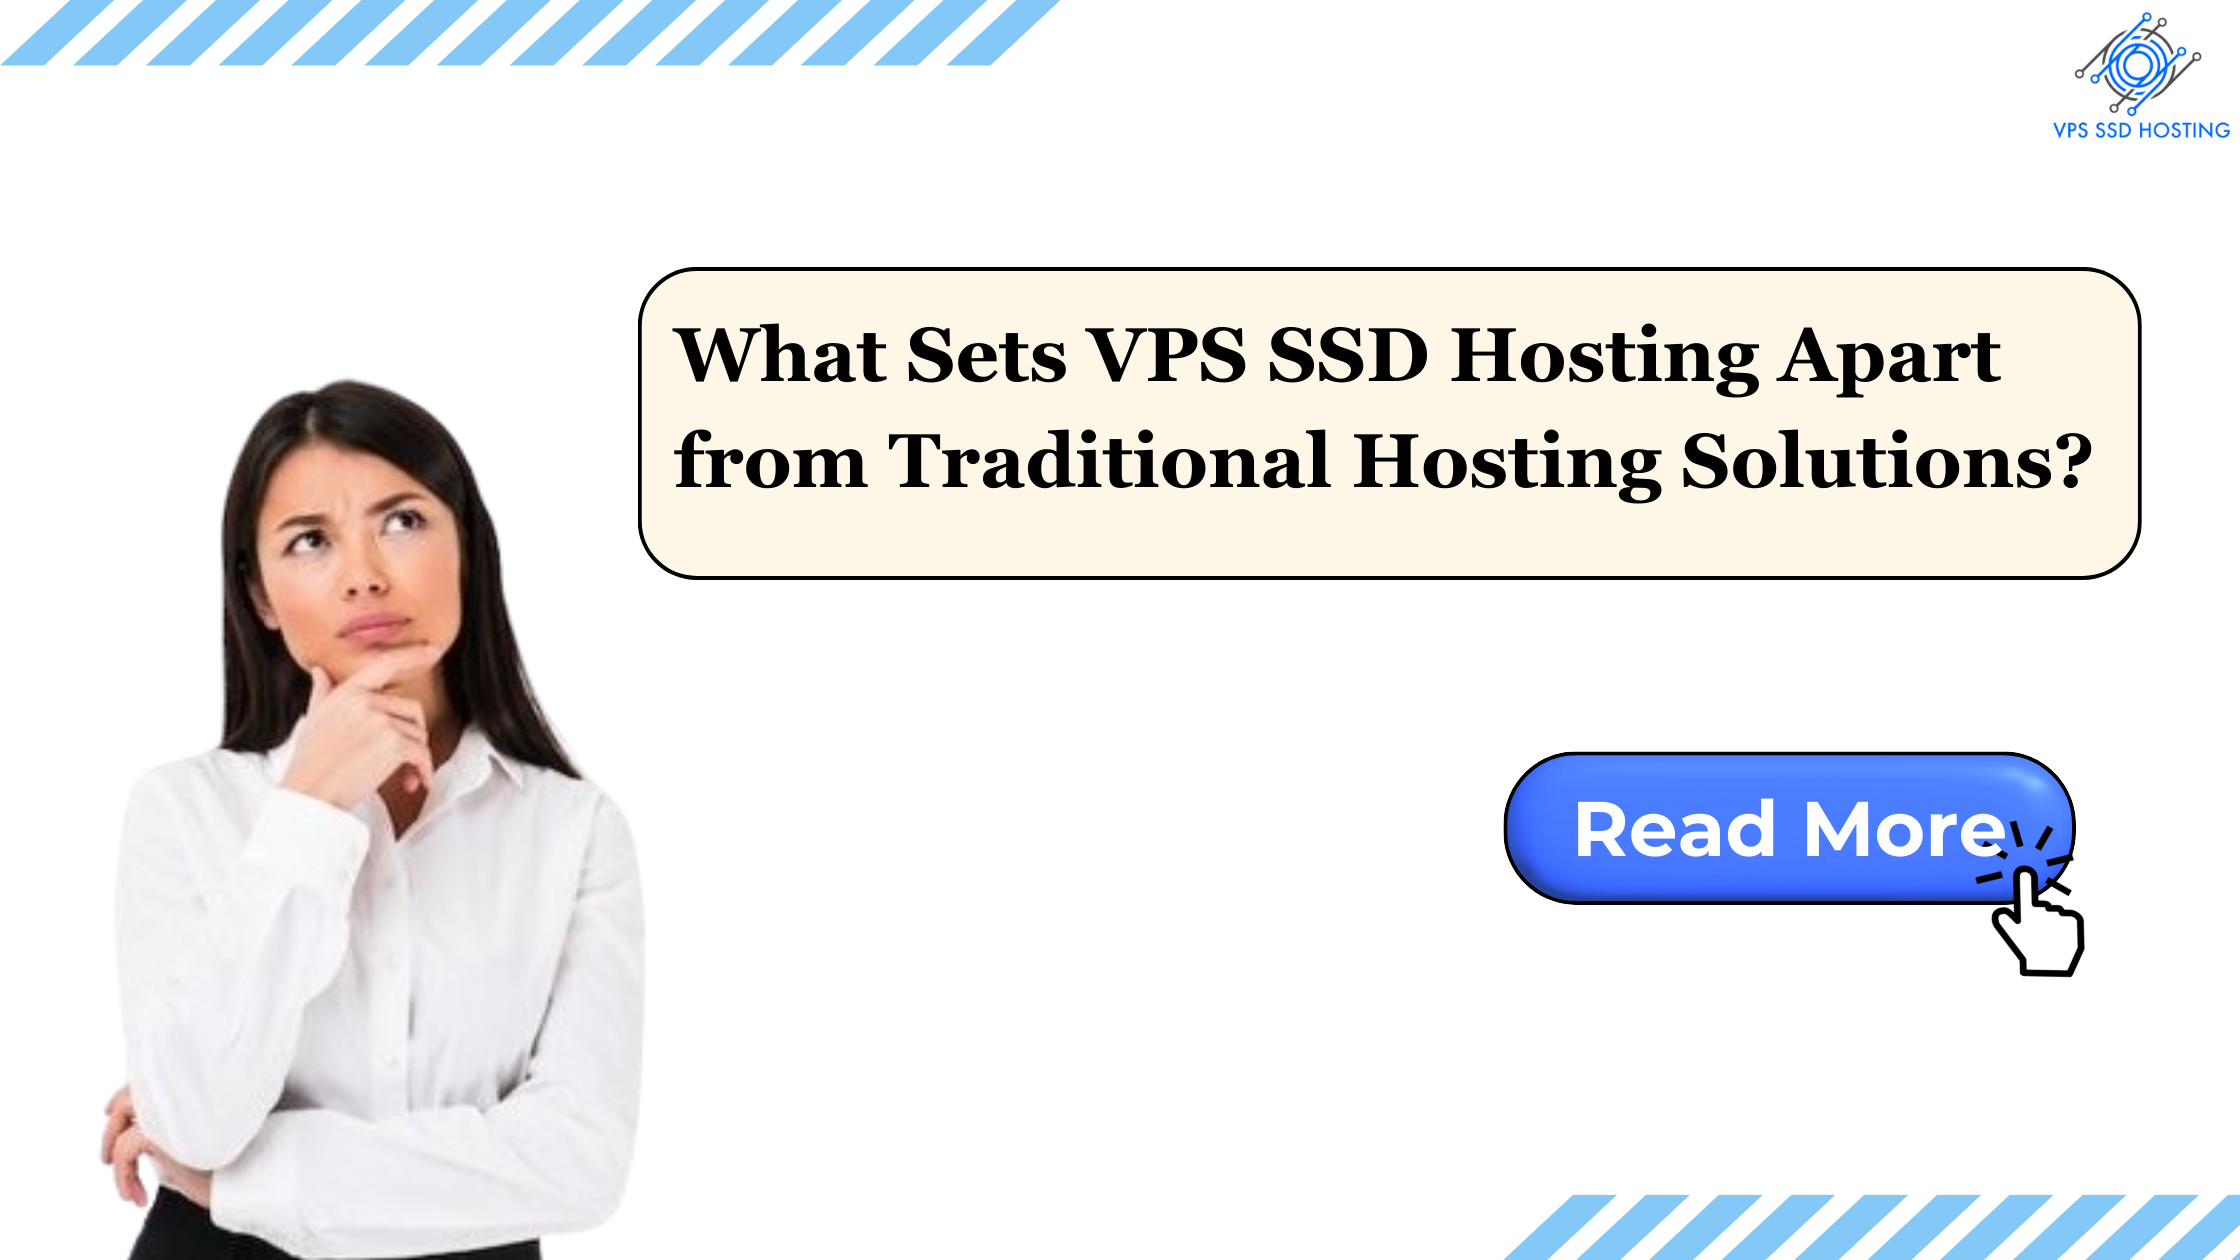 What Sets VPS SSD Hosting Apart from Traditional Hosting Solutions?